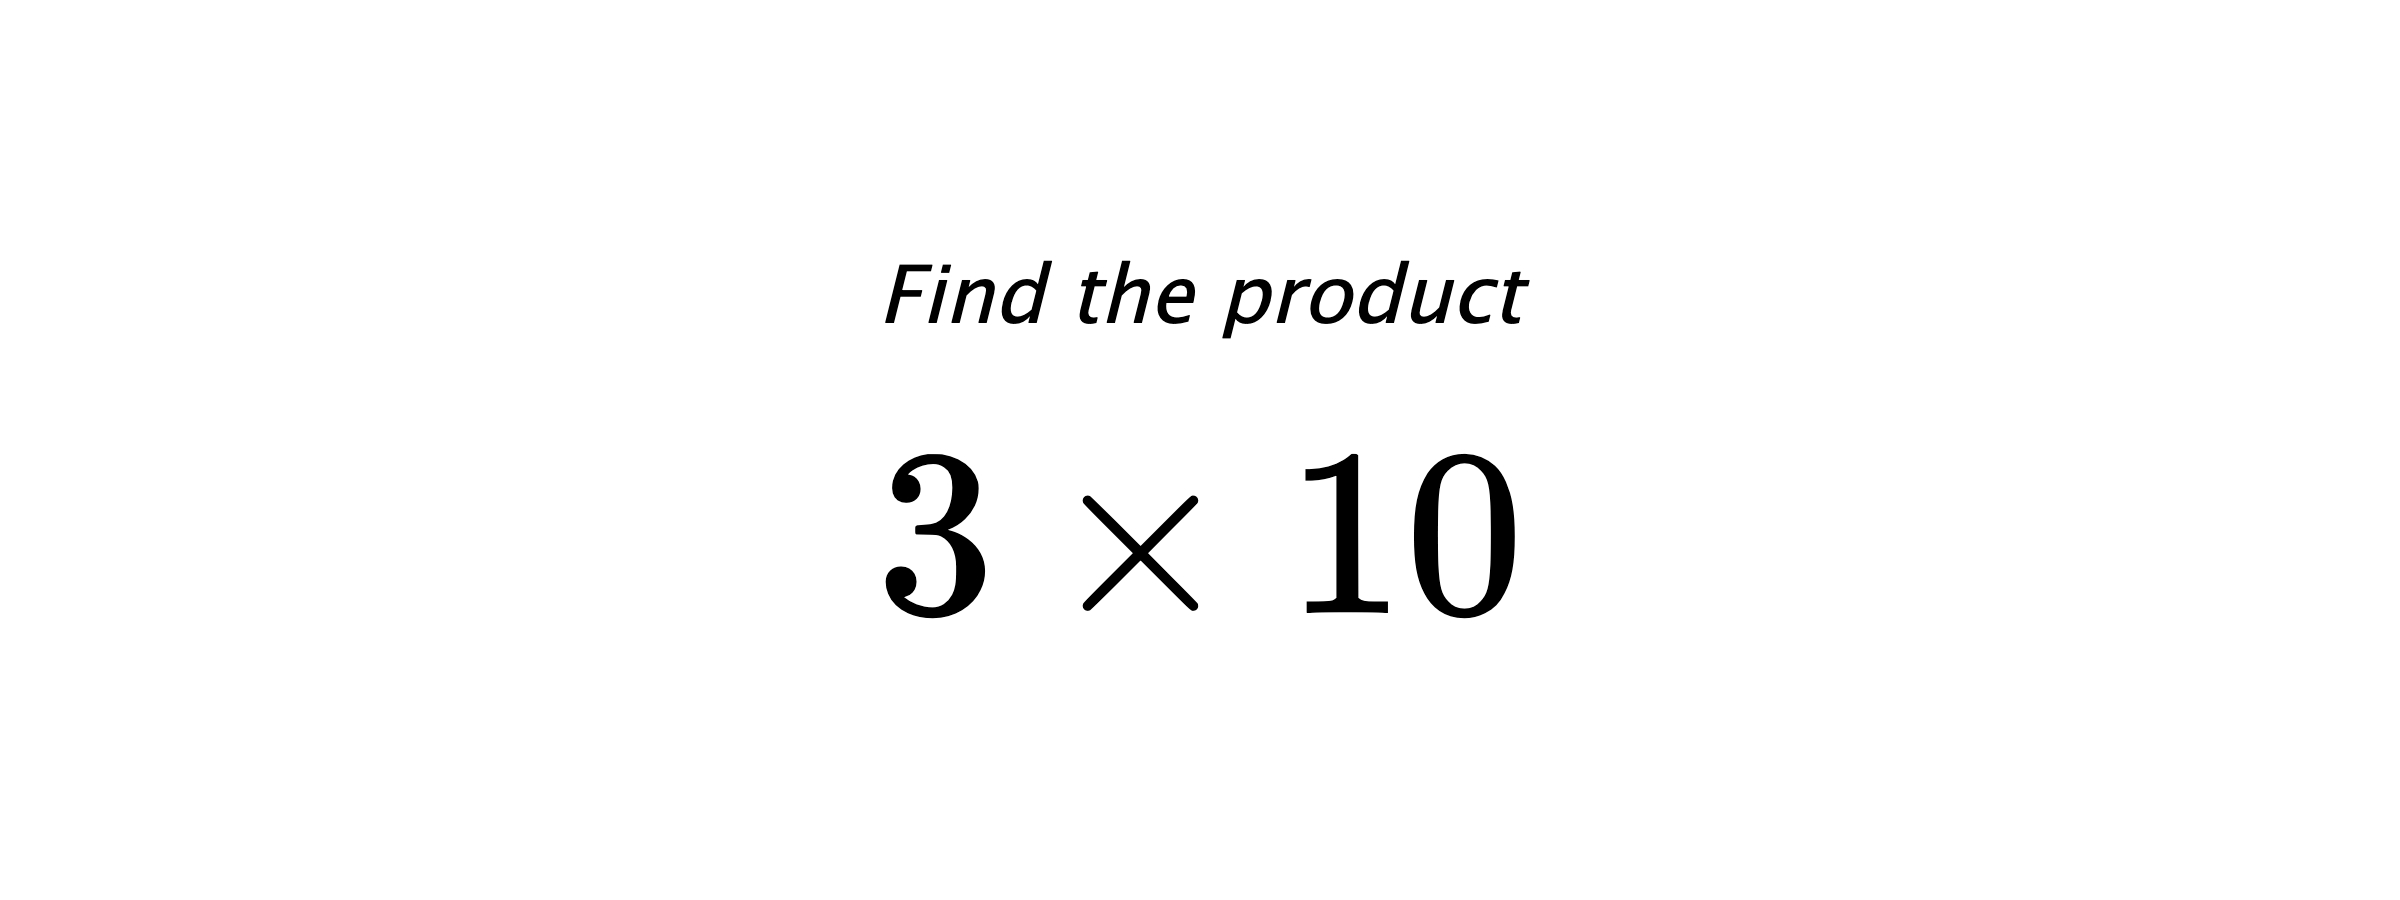 Find the product $ 3 \times 10 $